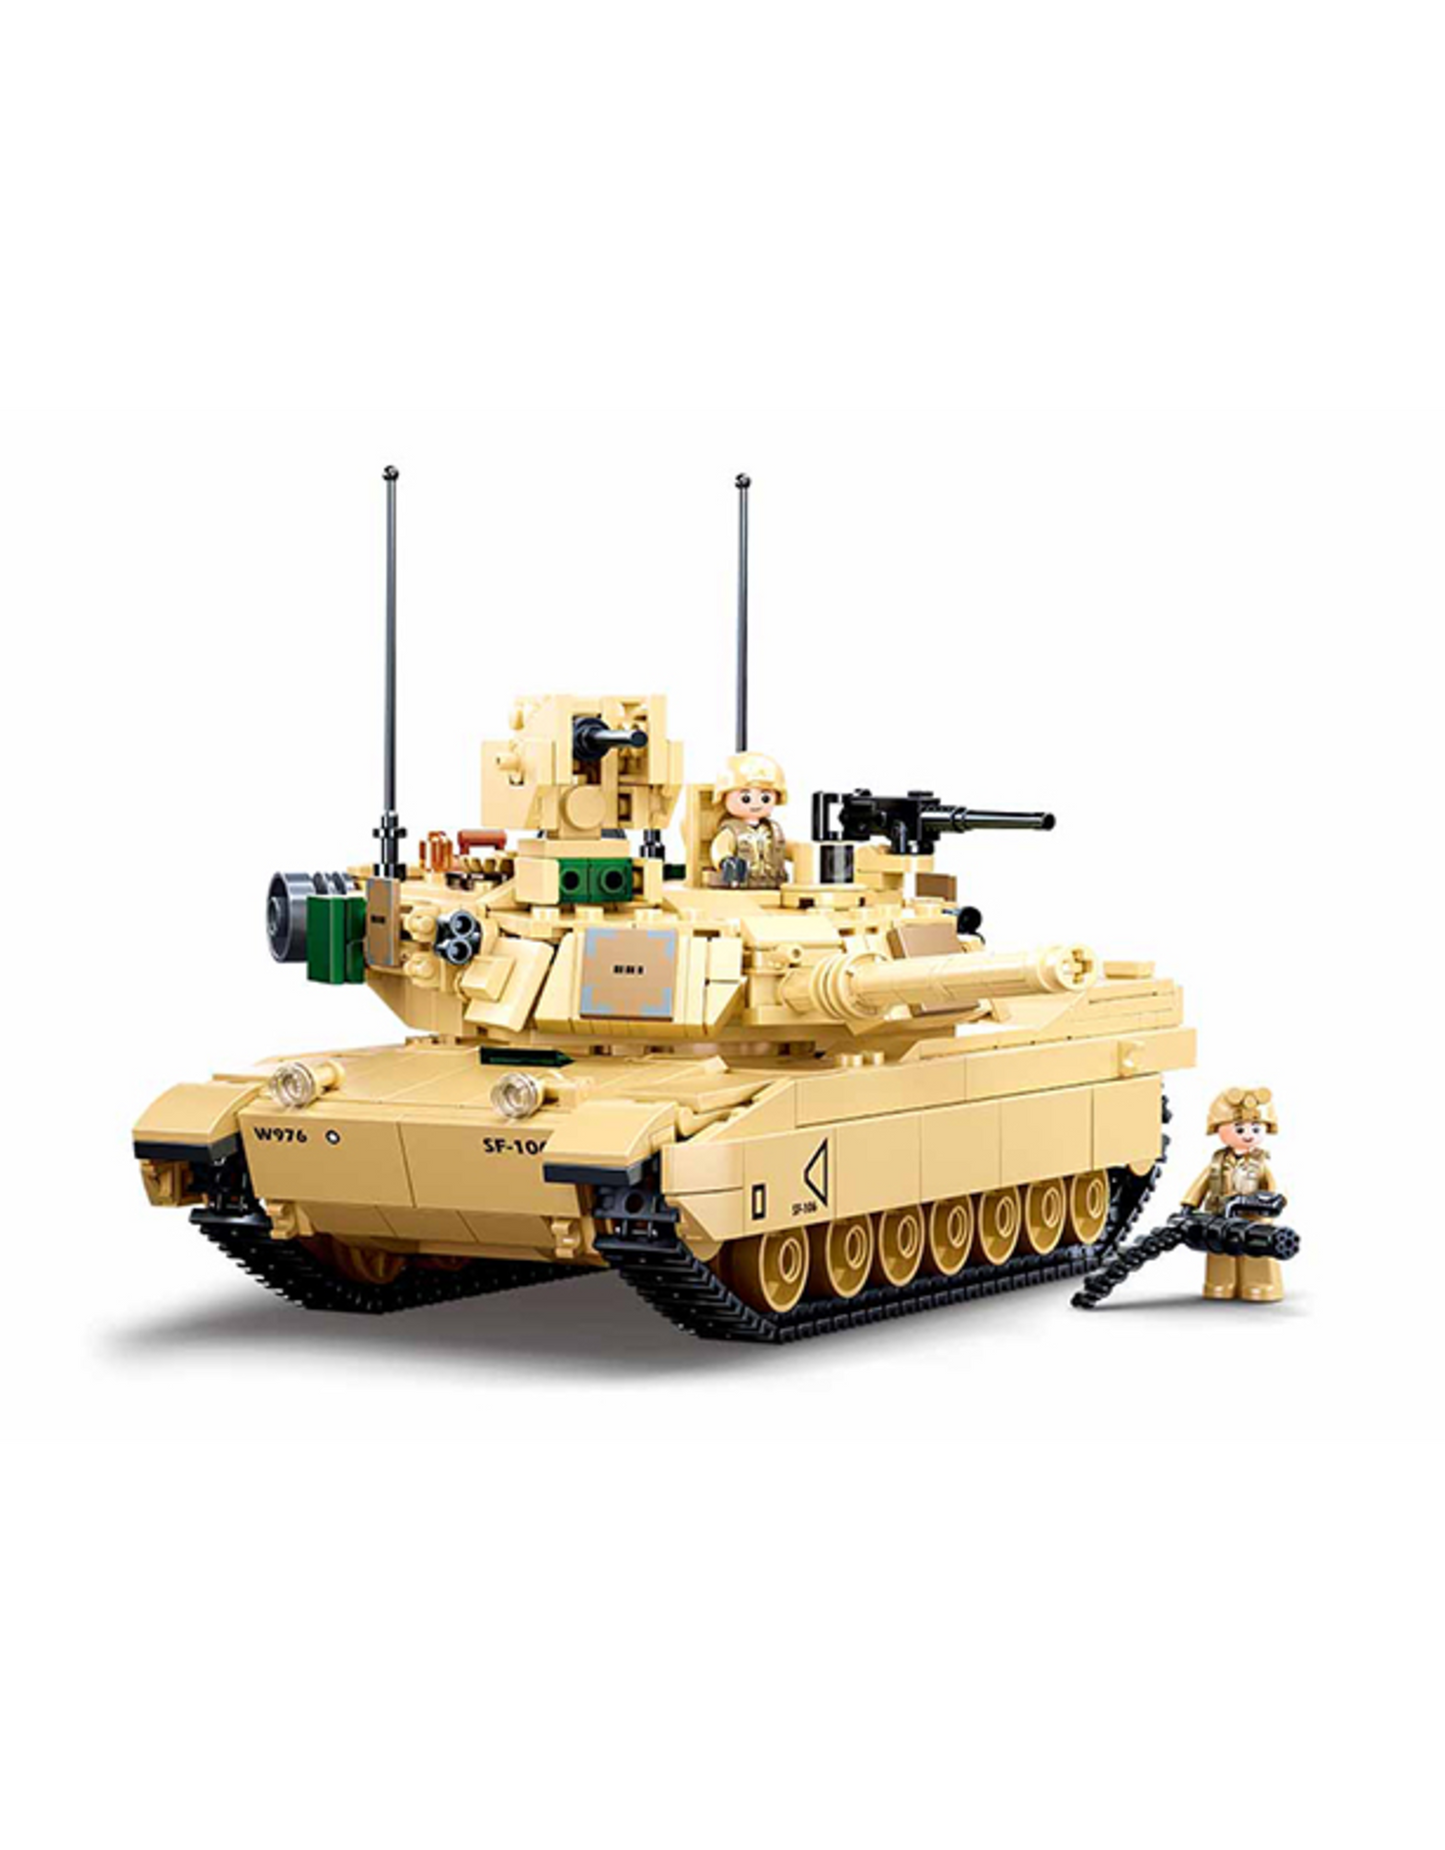  JANN Tank Building Set, M1A2 Abrams Main Battle Tank Military  Vehicles Building Toy Collectible Model, Compatible with Lego (1389PCS) :  Toys & Games